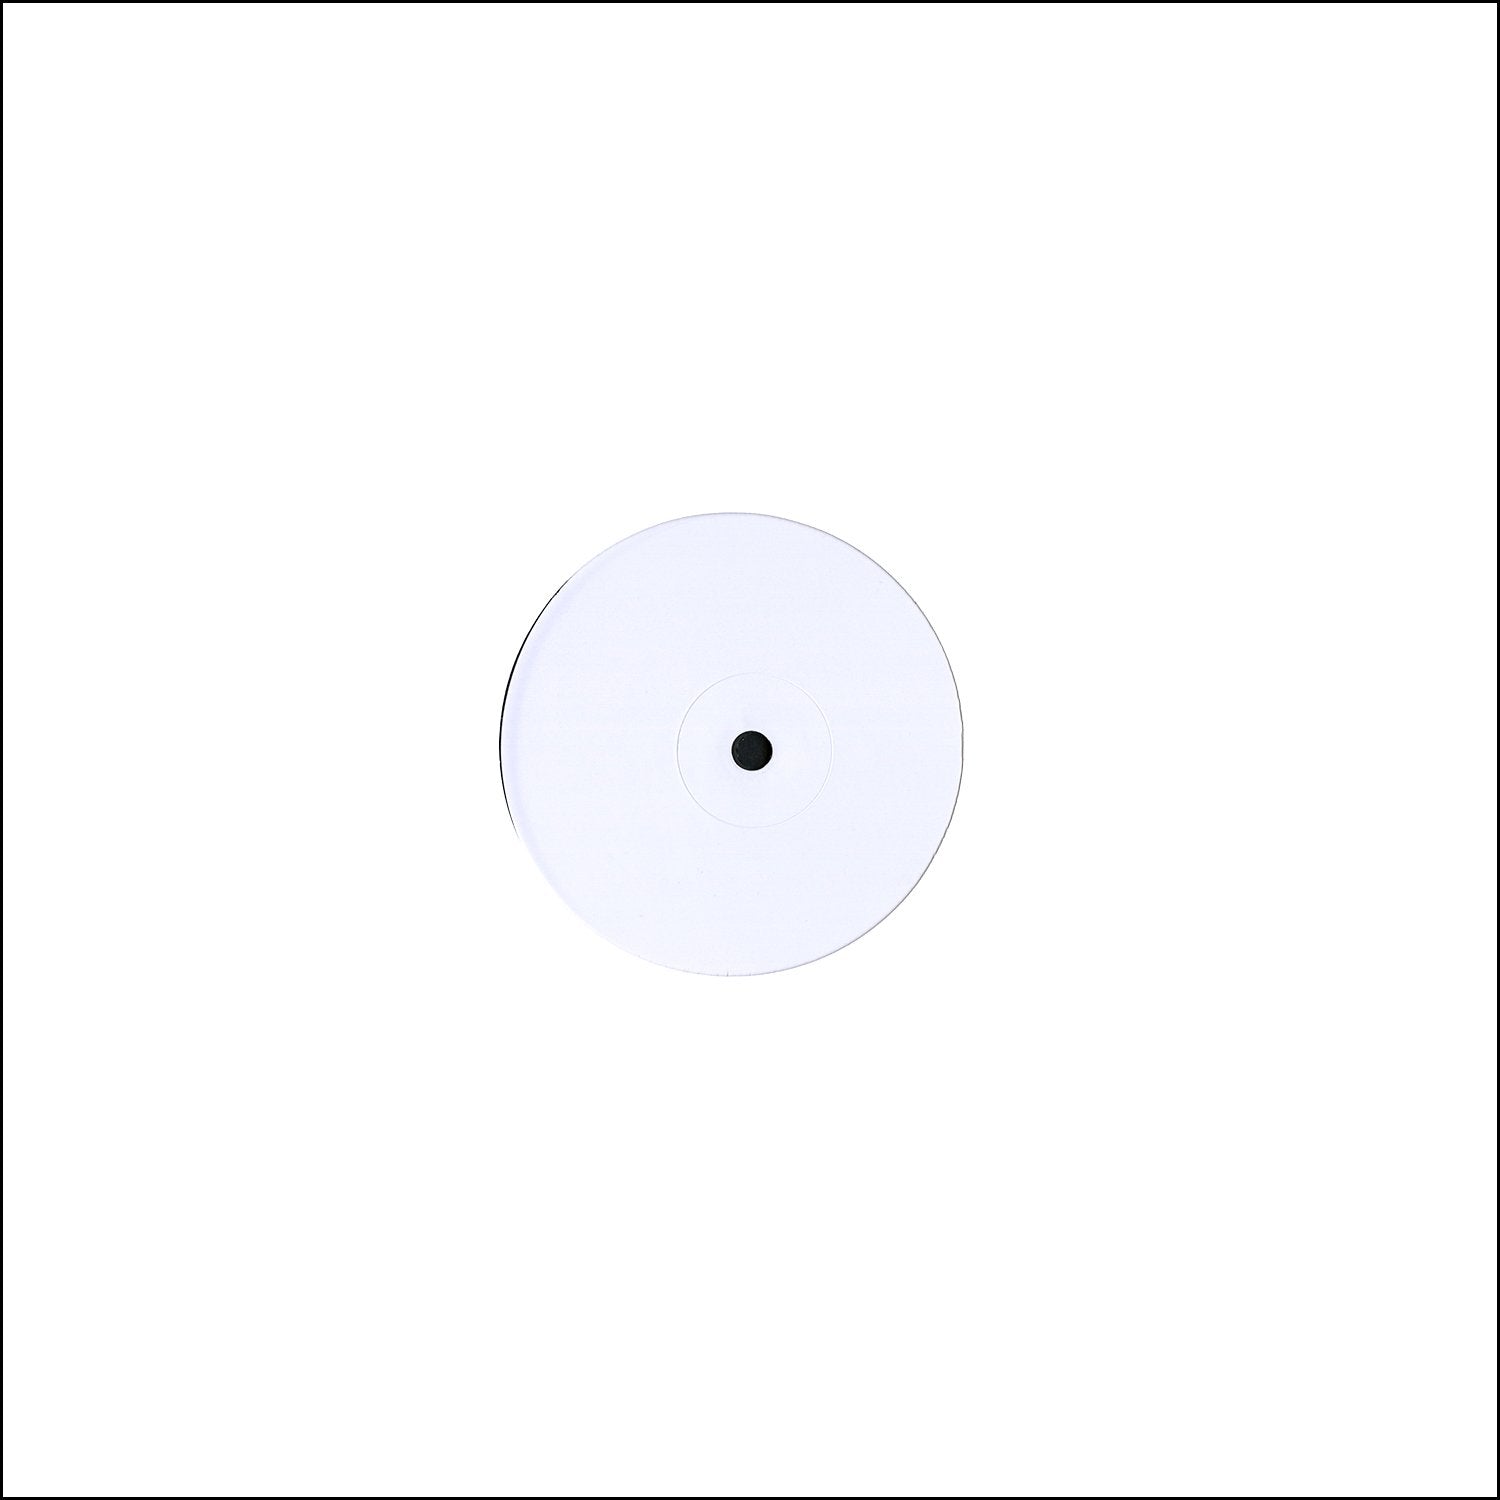 Made To Be Broken [Test Pressing]